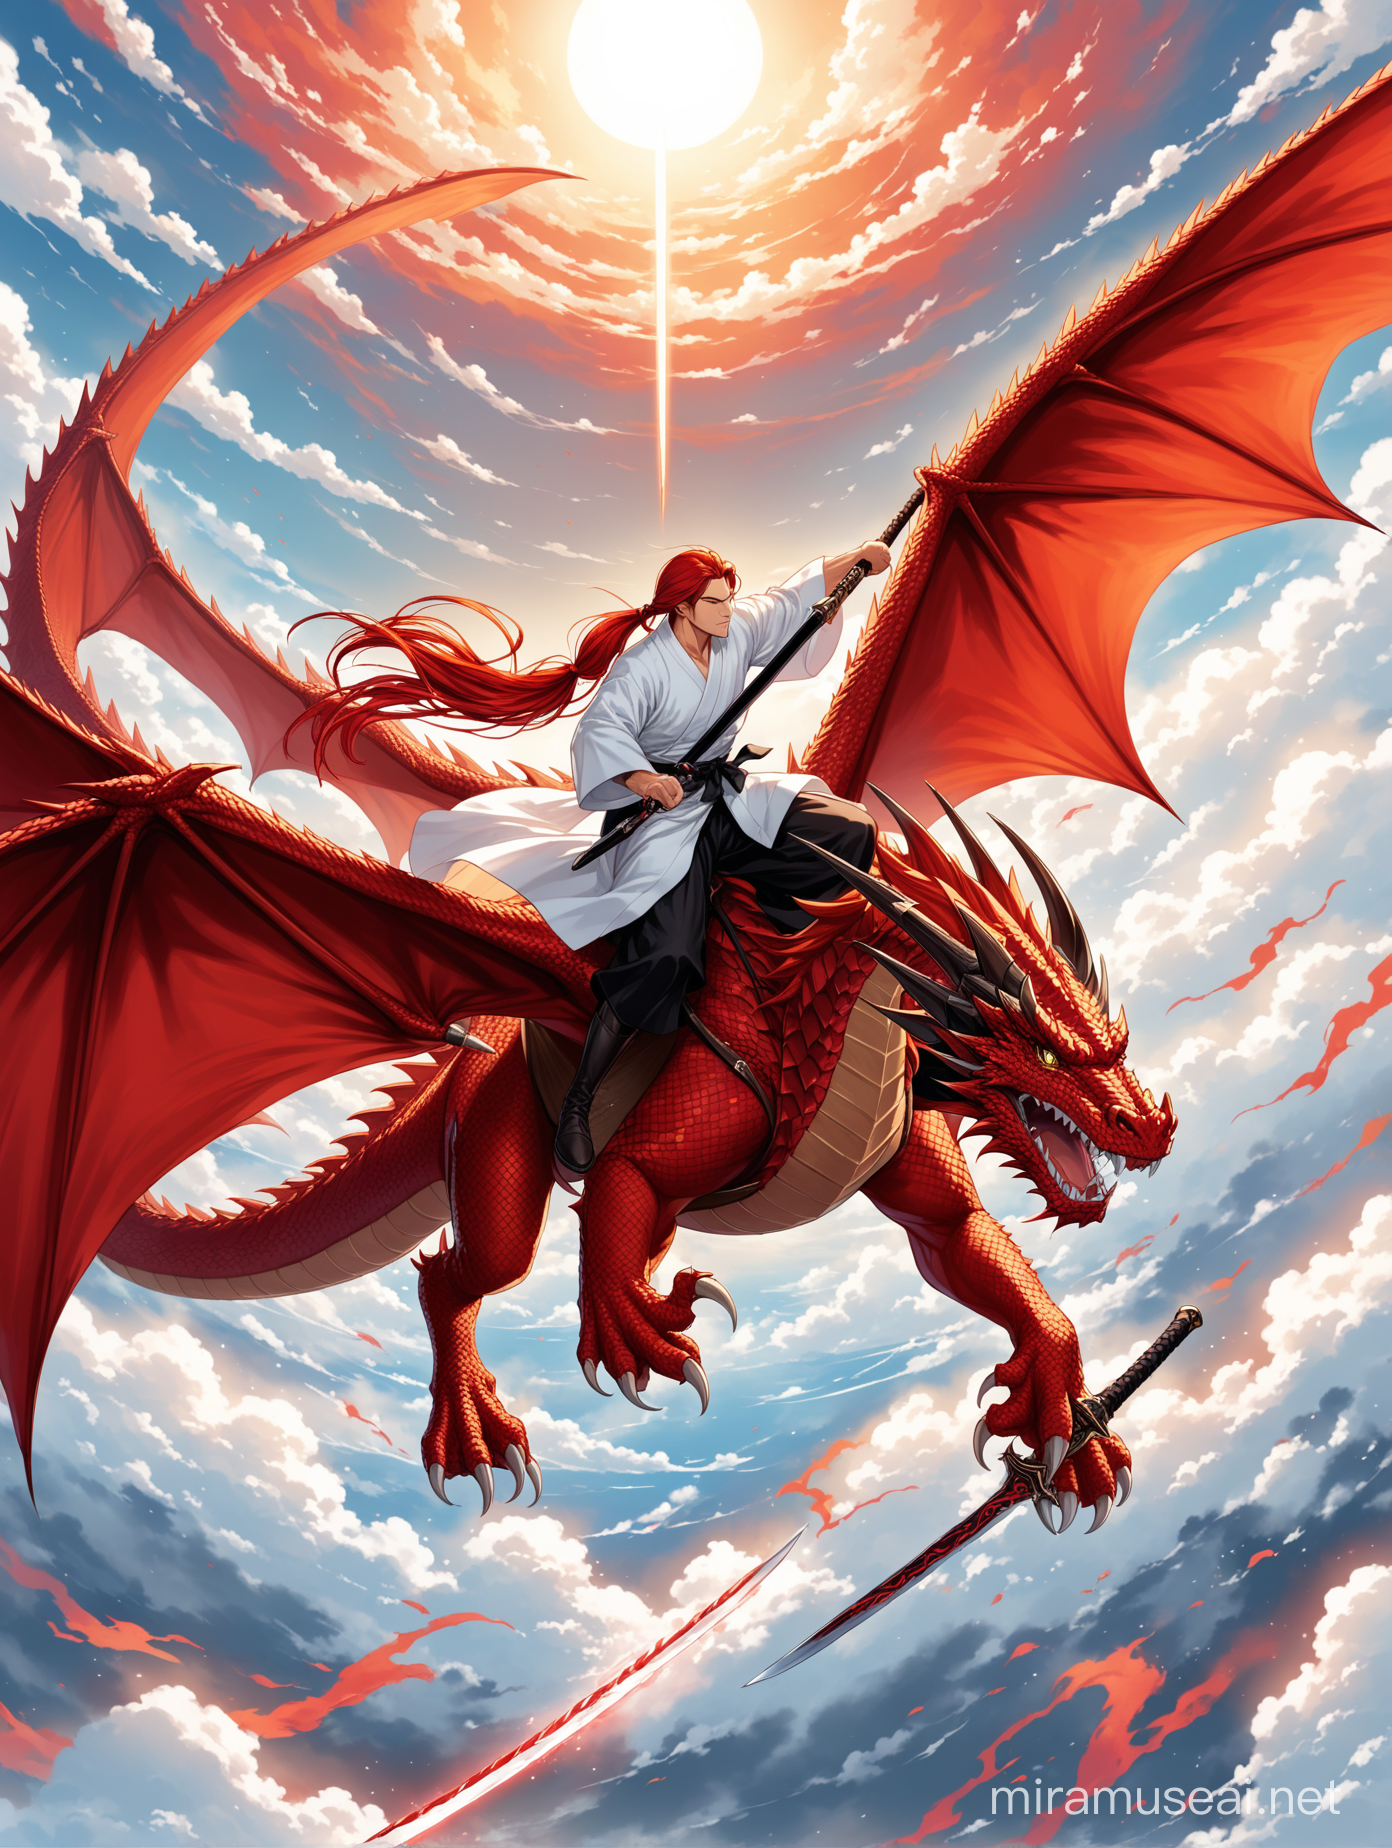 Redhaired Man Riding Red Dragon with Executioners Blade in Sky Battle